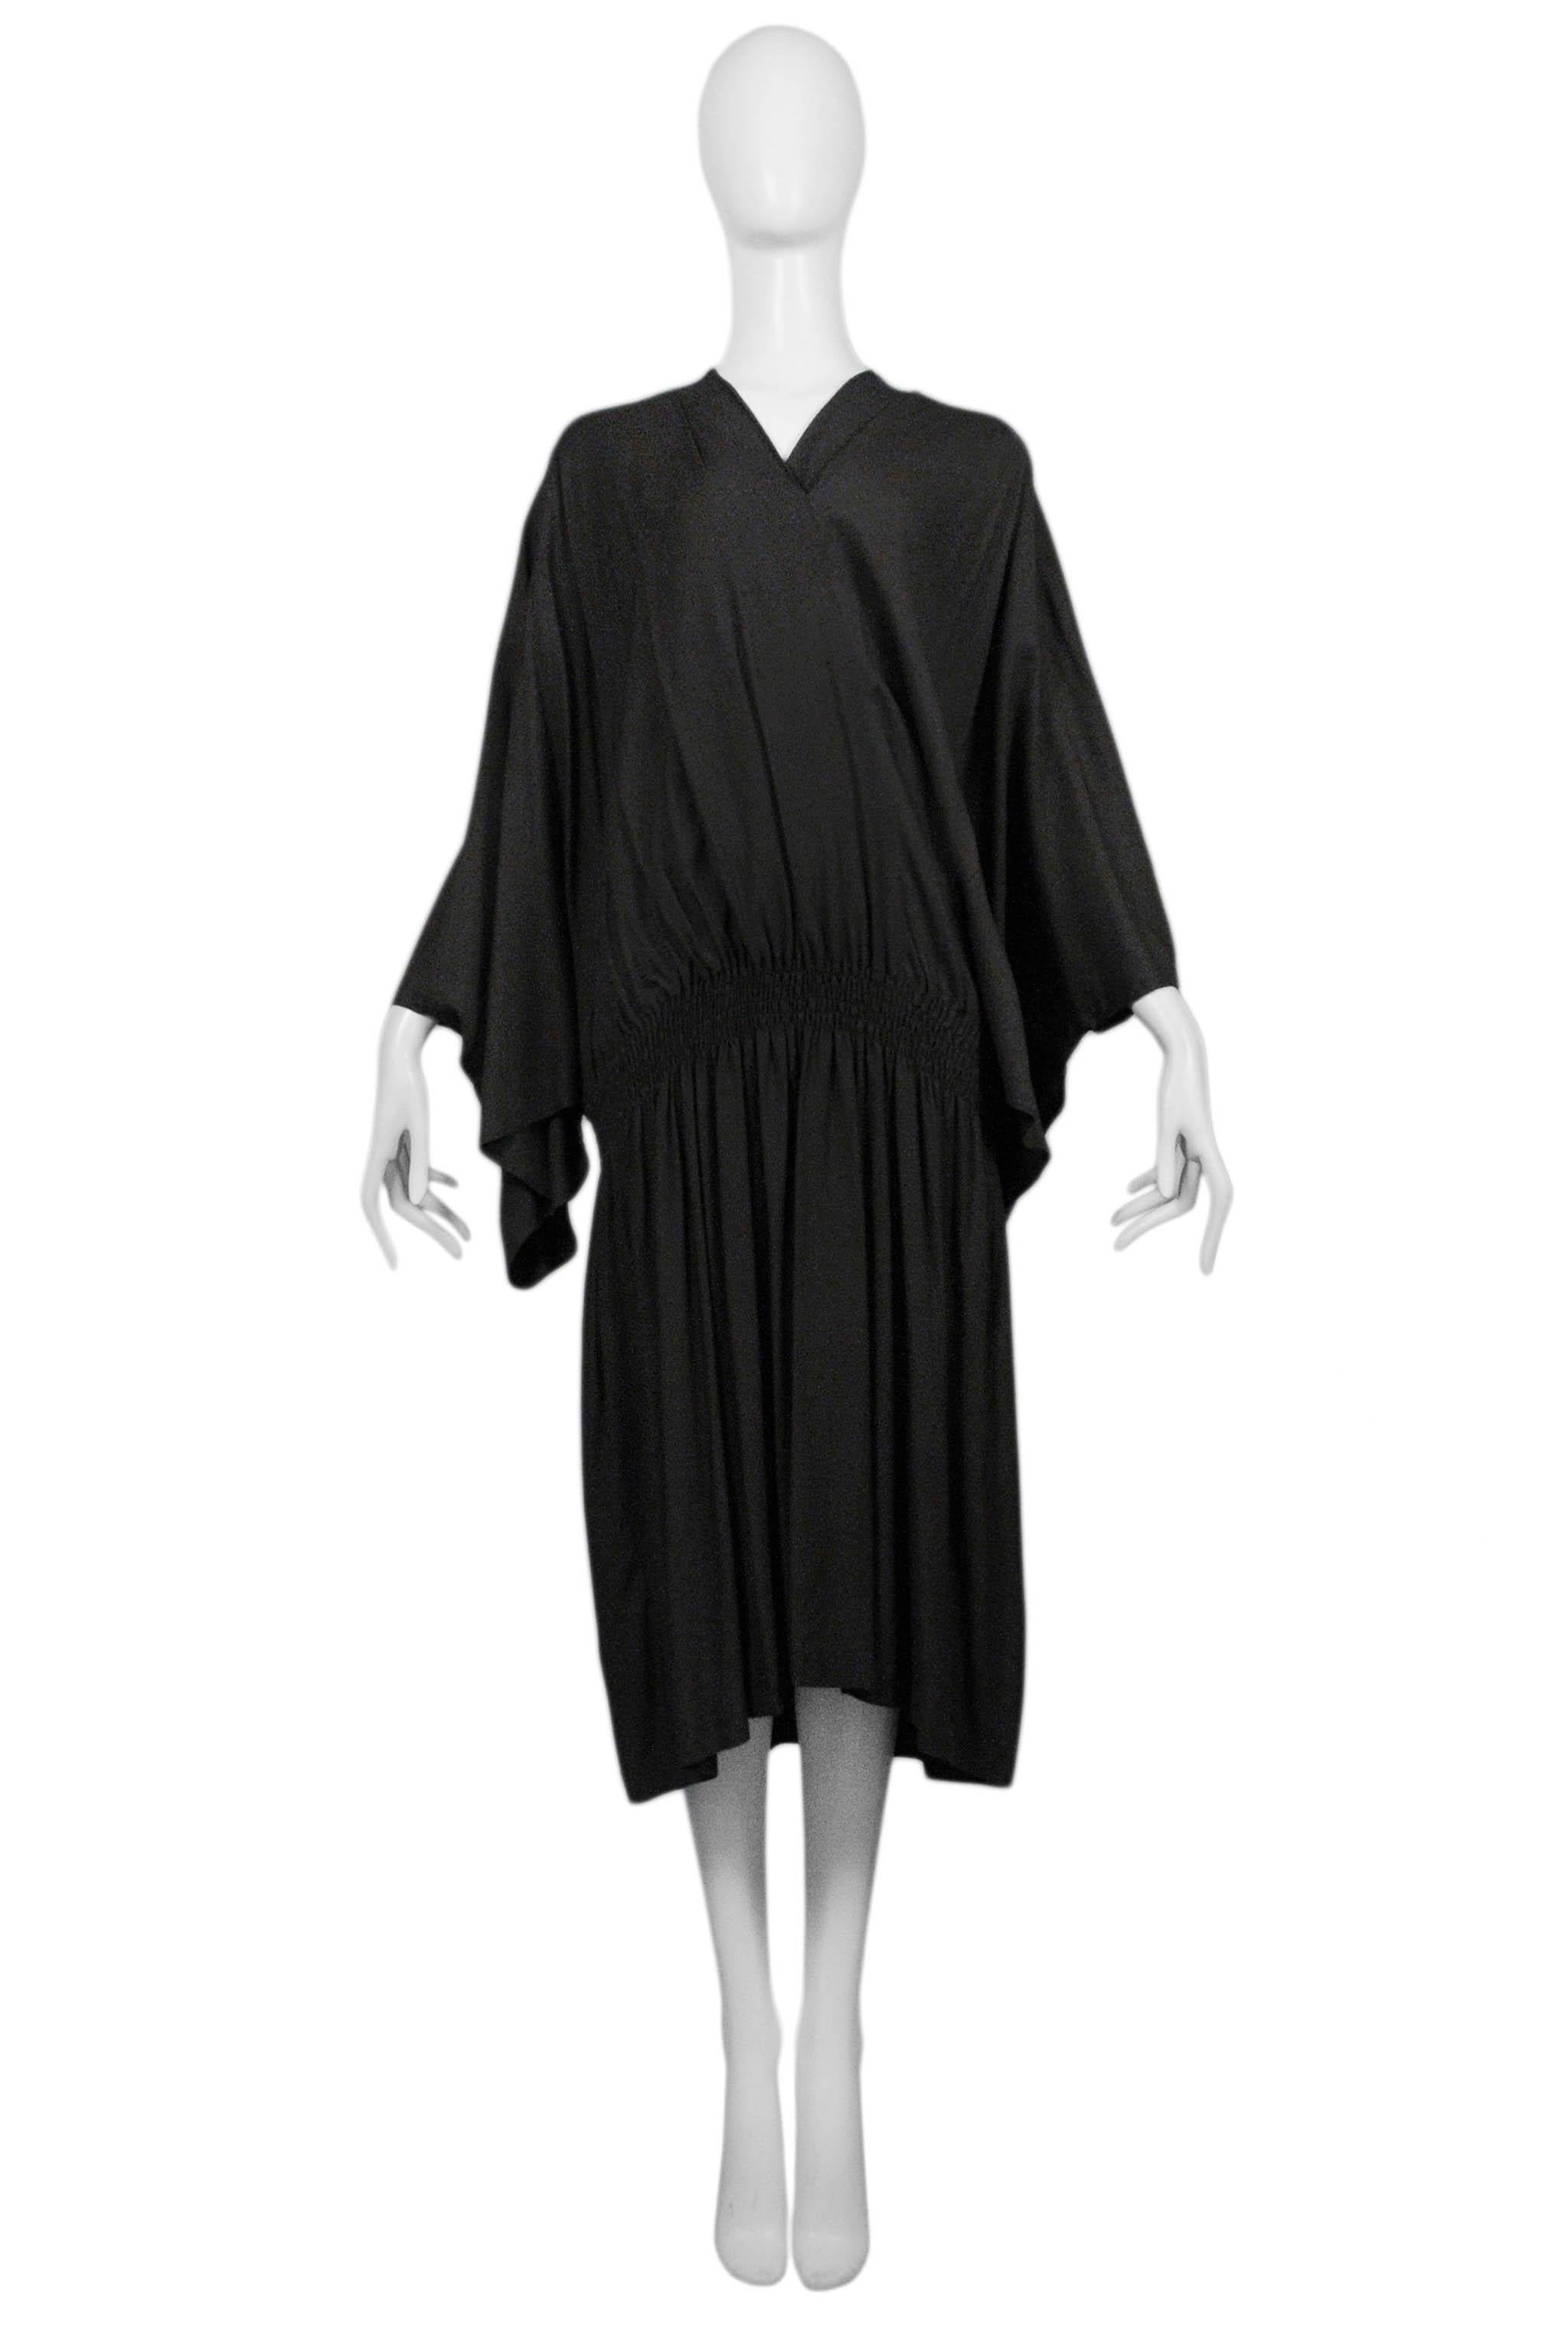 Resurrection Vintage is excited to offer a vintage Comme des Garcons dark brown kimono dress with drop-waist, high v neck, and butterfly sleeves. Collection 1982.

Comme Des Garcons
Size: Small/Medium
Measurements: Bust Free, Waist (unstretched)